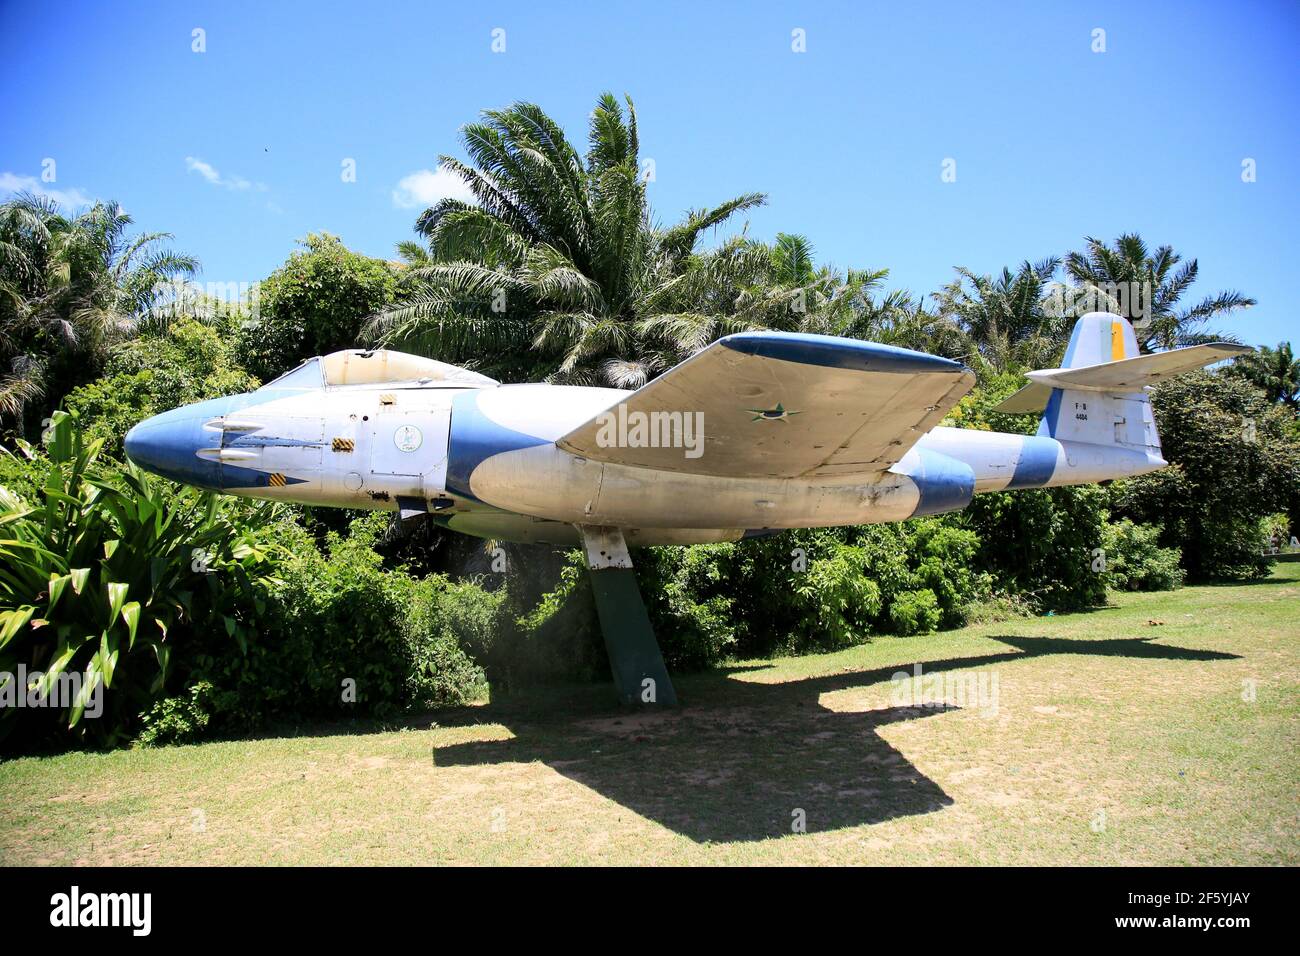 salvador, bahia, brazil - january 18, 2021: Gloster Meteor, a British-made fighter plane used in the second war is seen on display at the Salvador Air Stock Photo